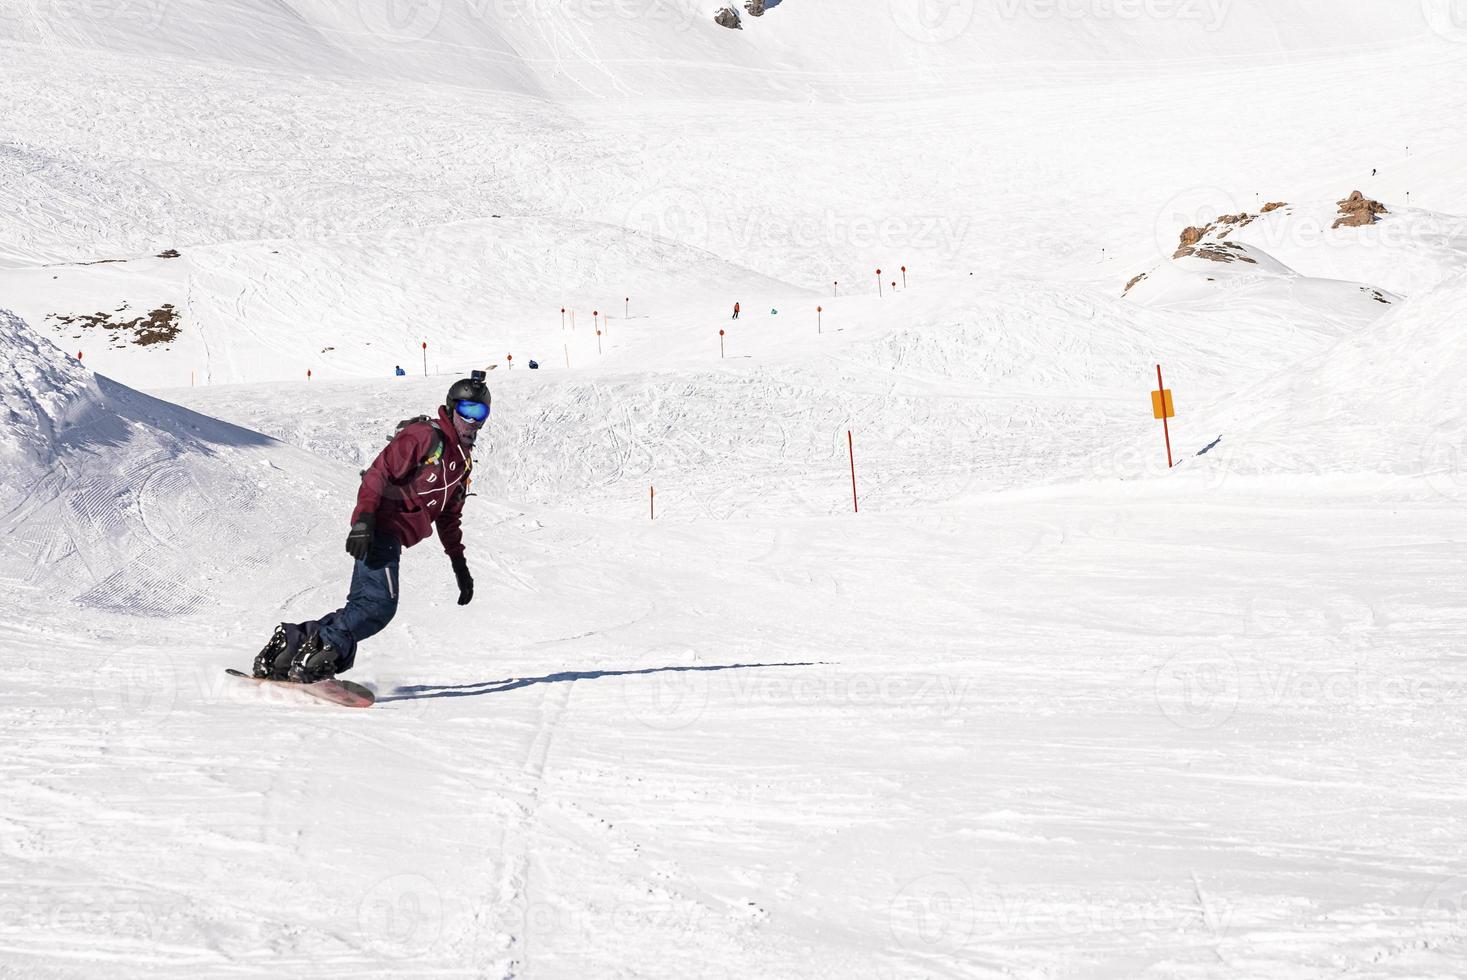 Young snowboarder sliding down snowy slope on mountain at winter resort photo